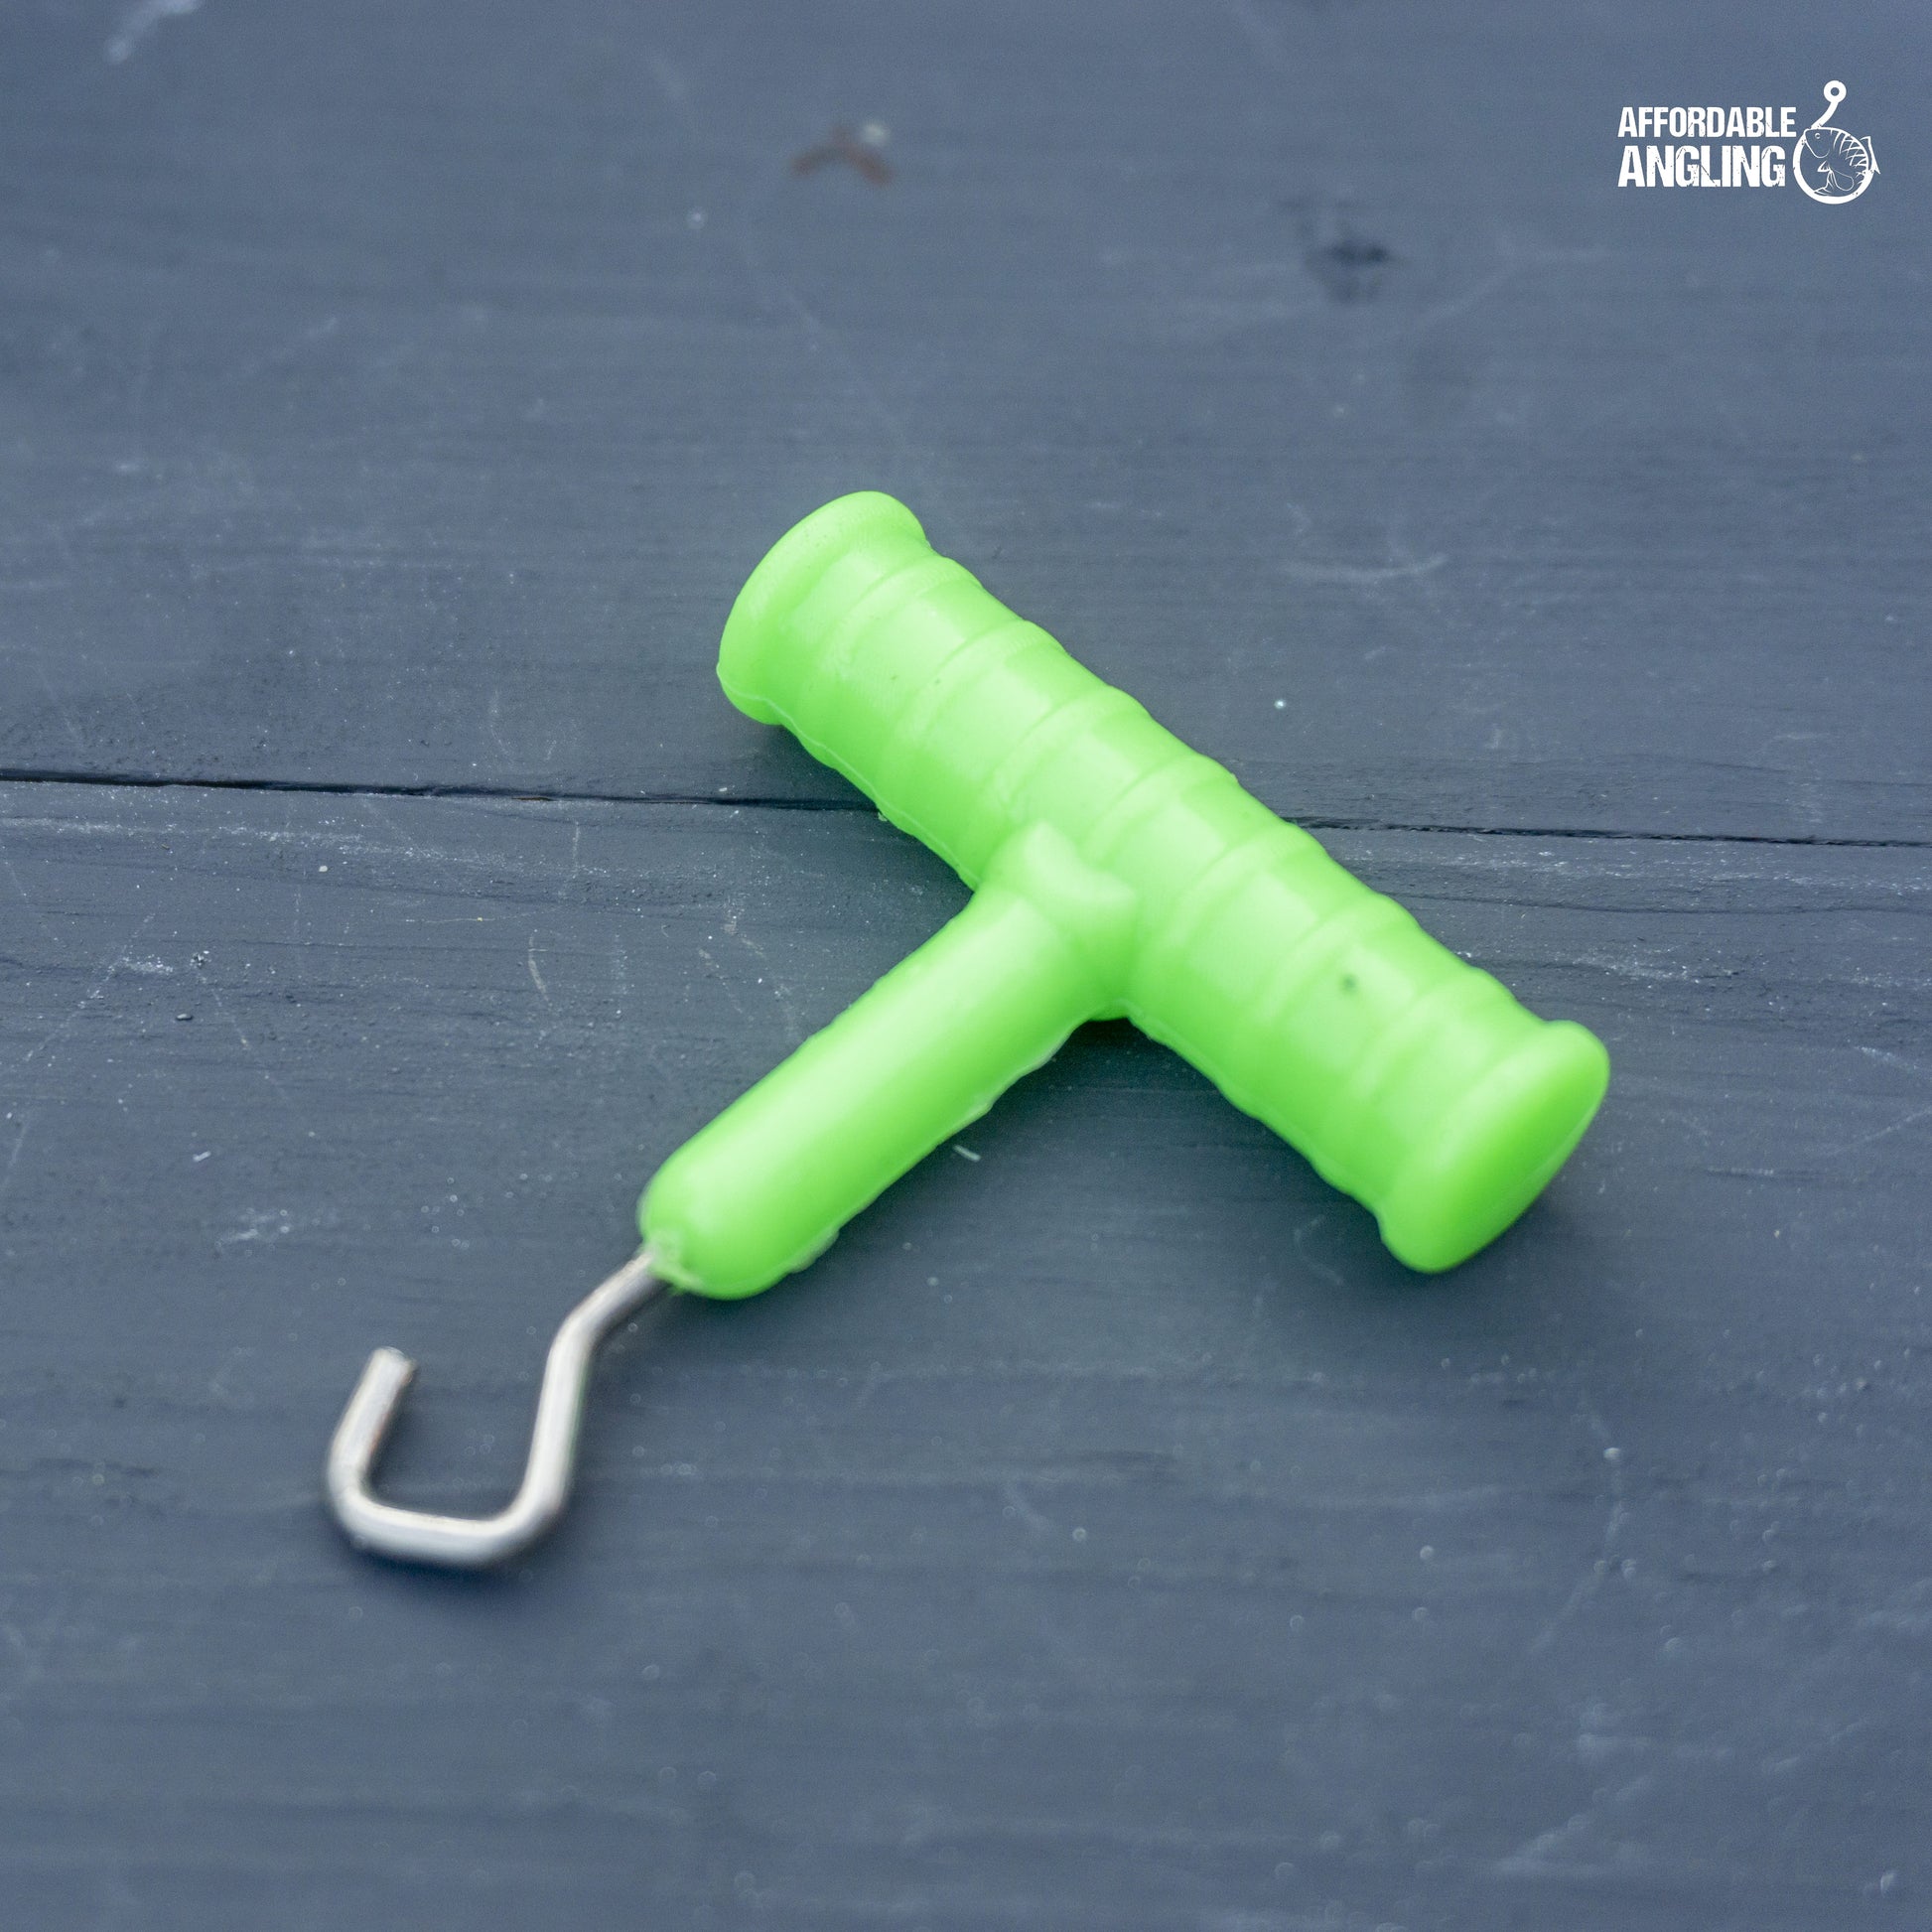 Knot Puller – Affordable Angling UK